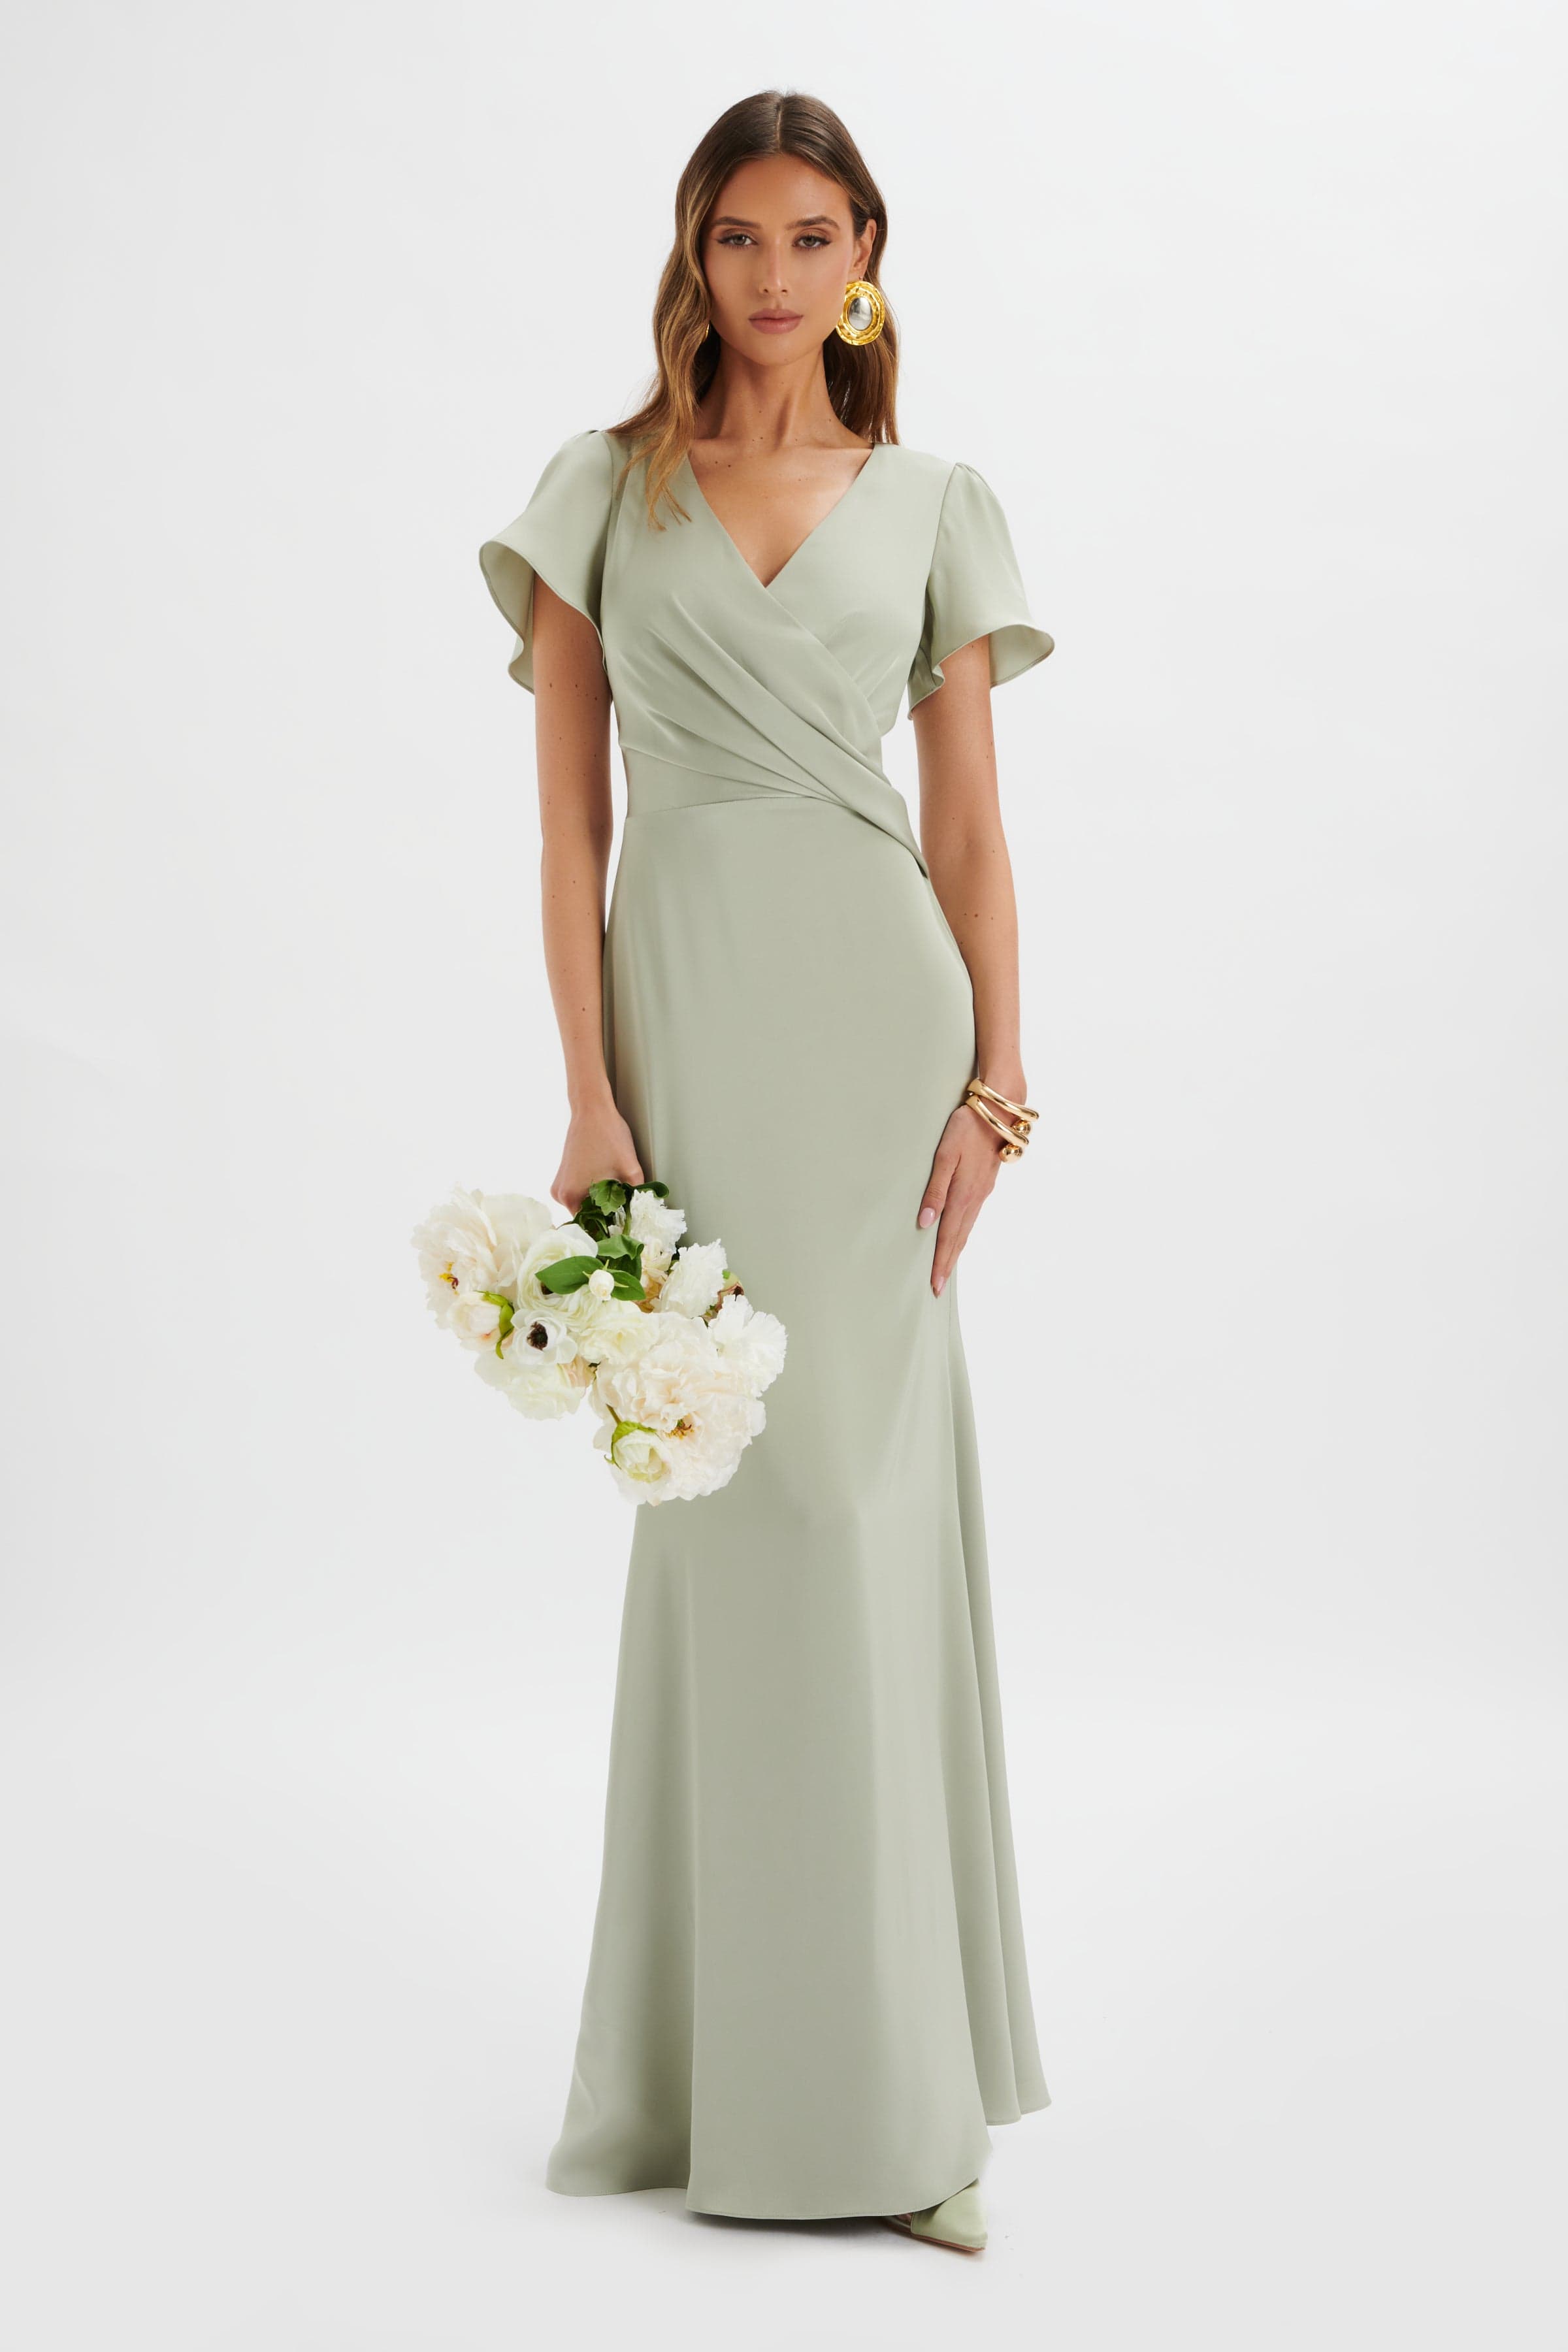 BEAU Draped Wrap Satin Maxi Dress with Sleeves in Sage Green